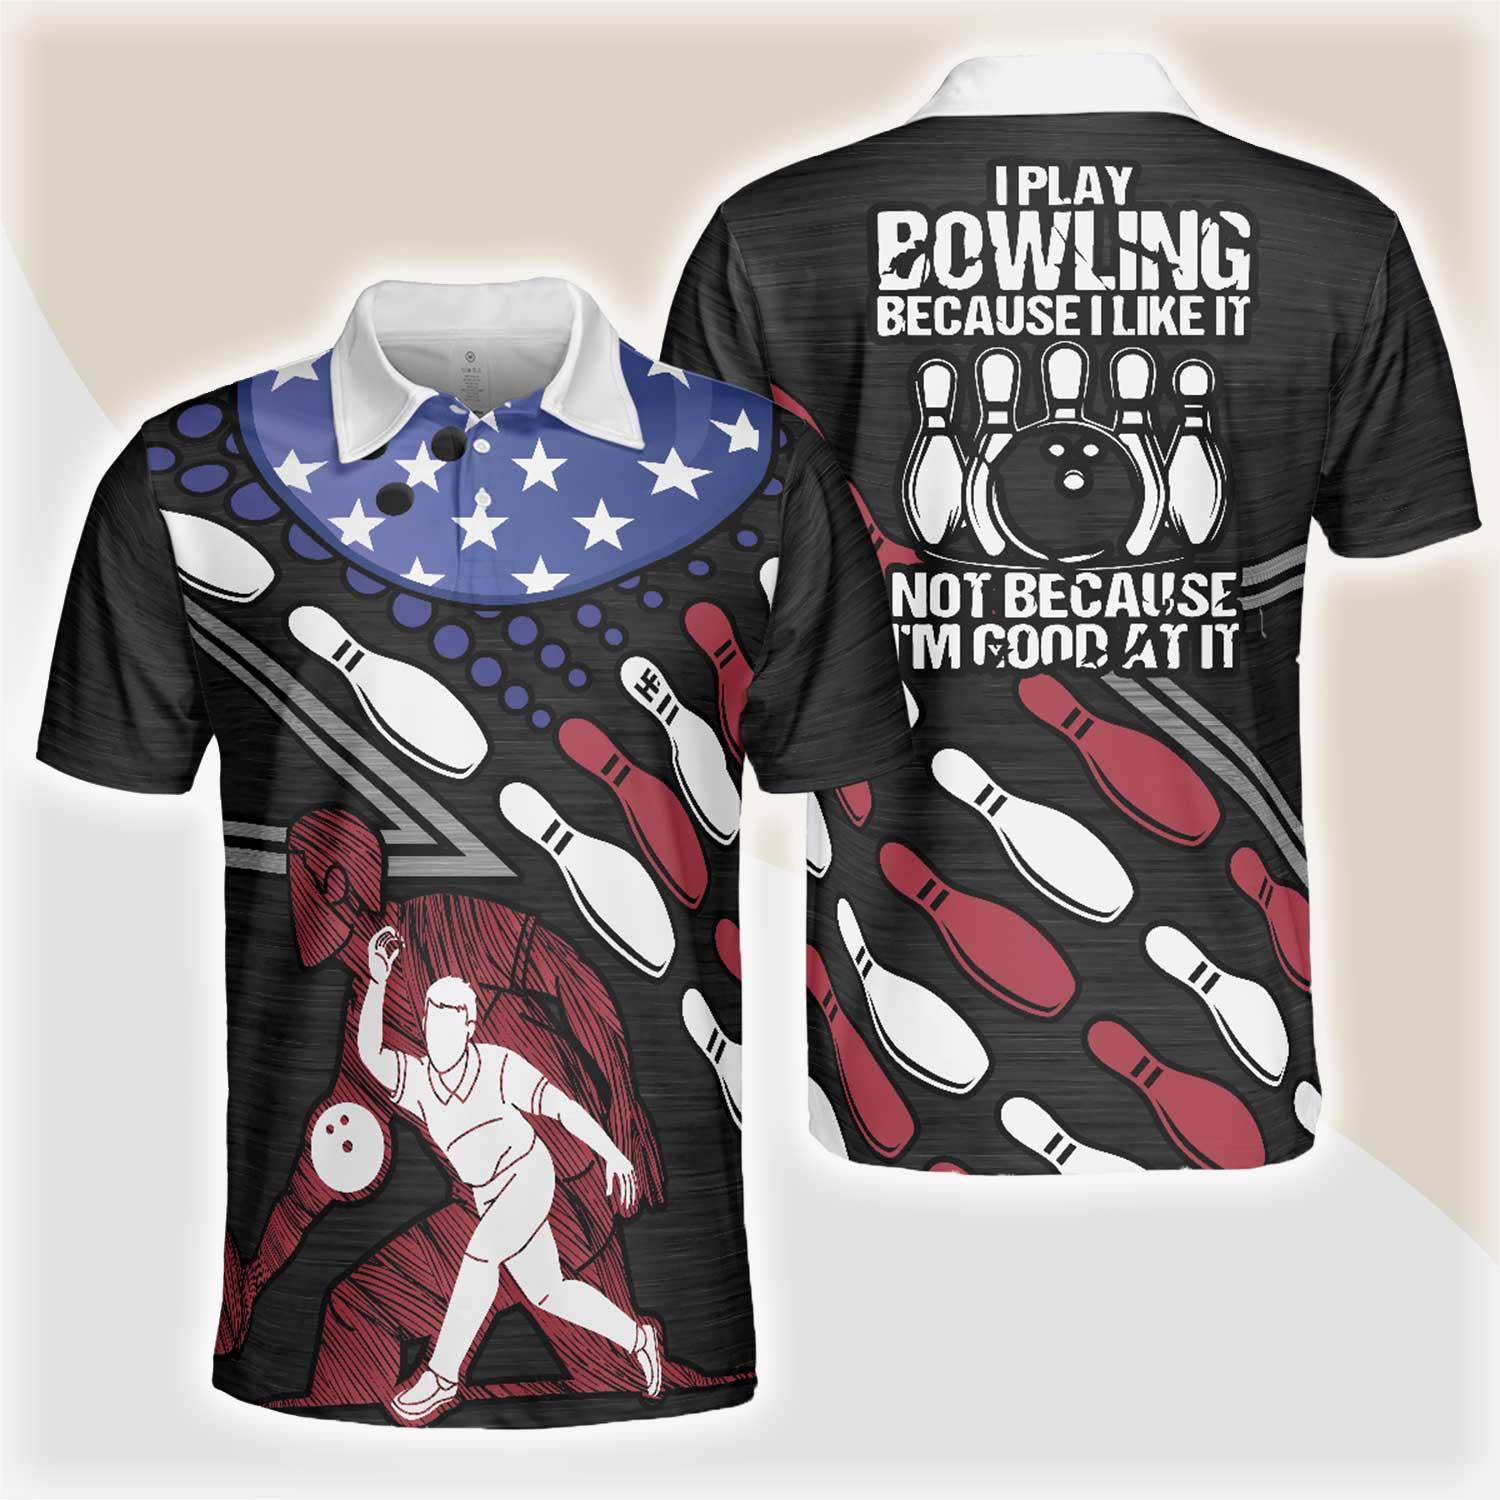 Bowling Men Polo Shirt - I Play Bowling Because I Like It Not Because I'm Good At It Polo Shirt, American Flag Bowling Polo Shirt - Gift For Friend, Family, Bowling Lovers - Amzanimalsgift